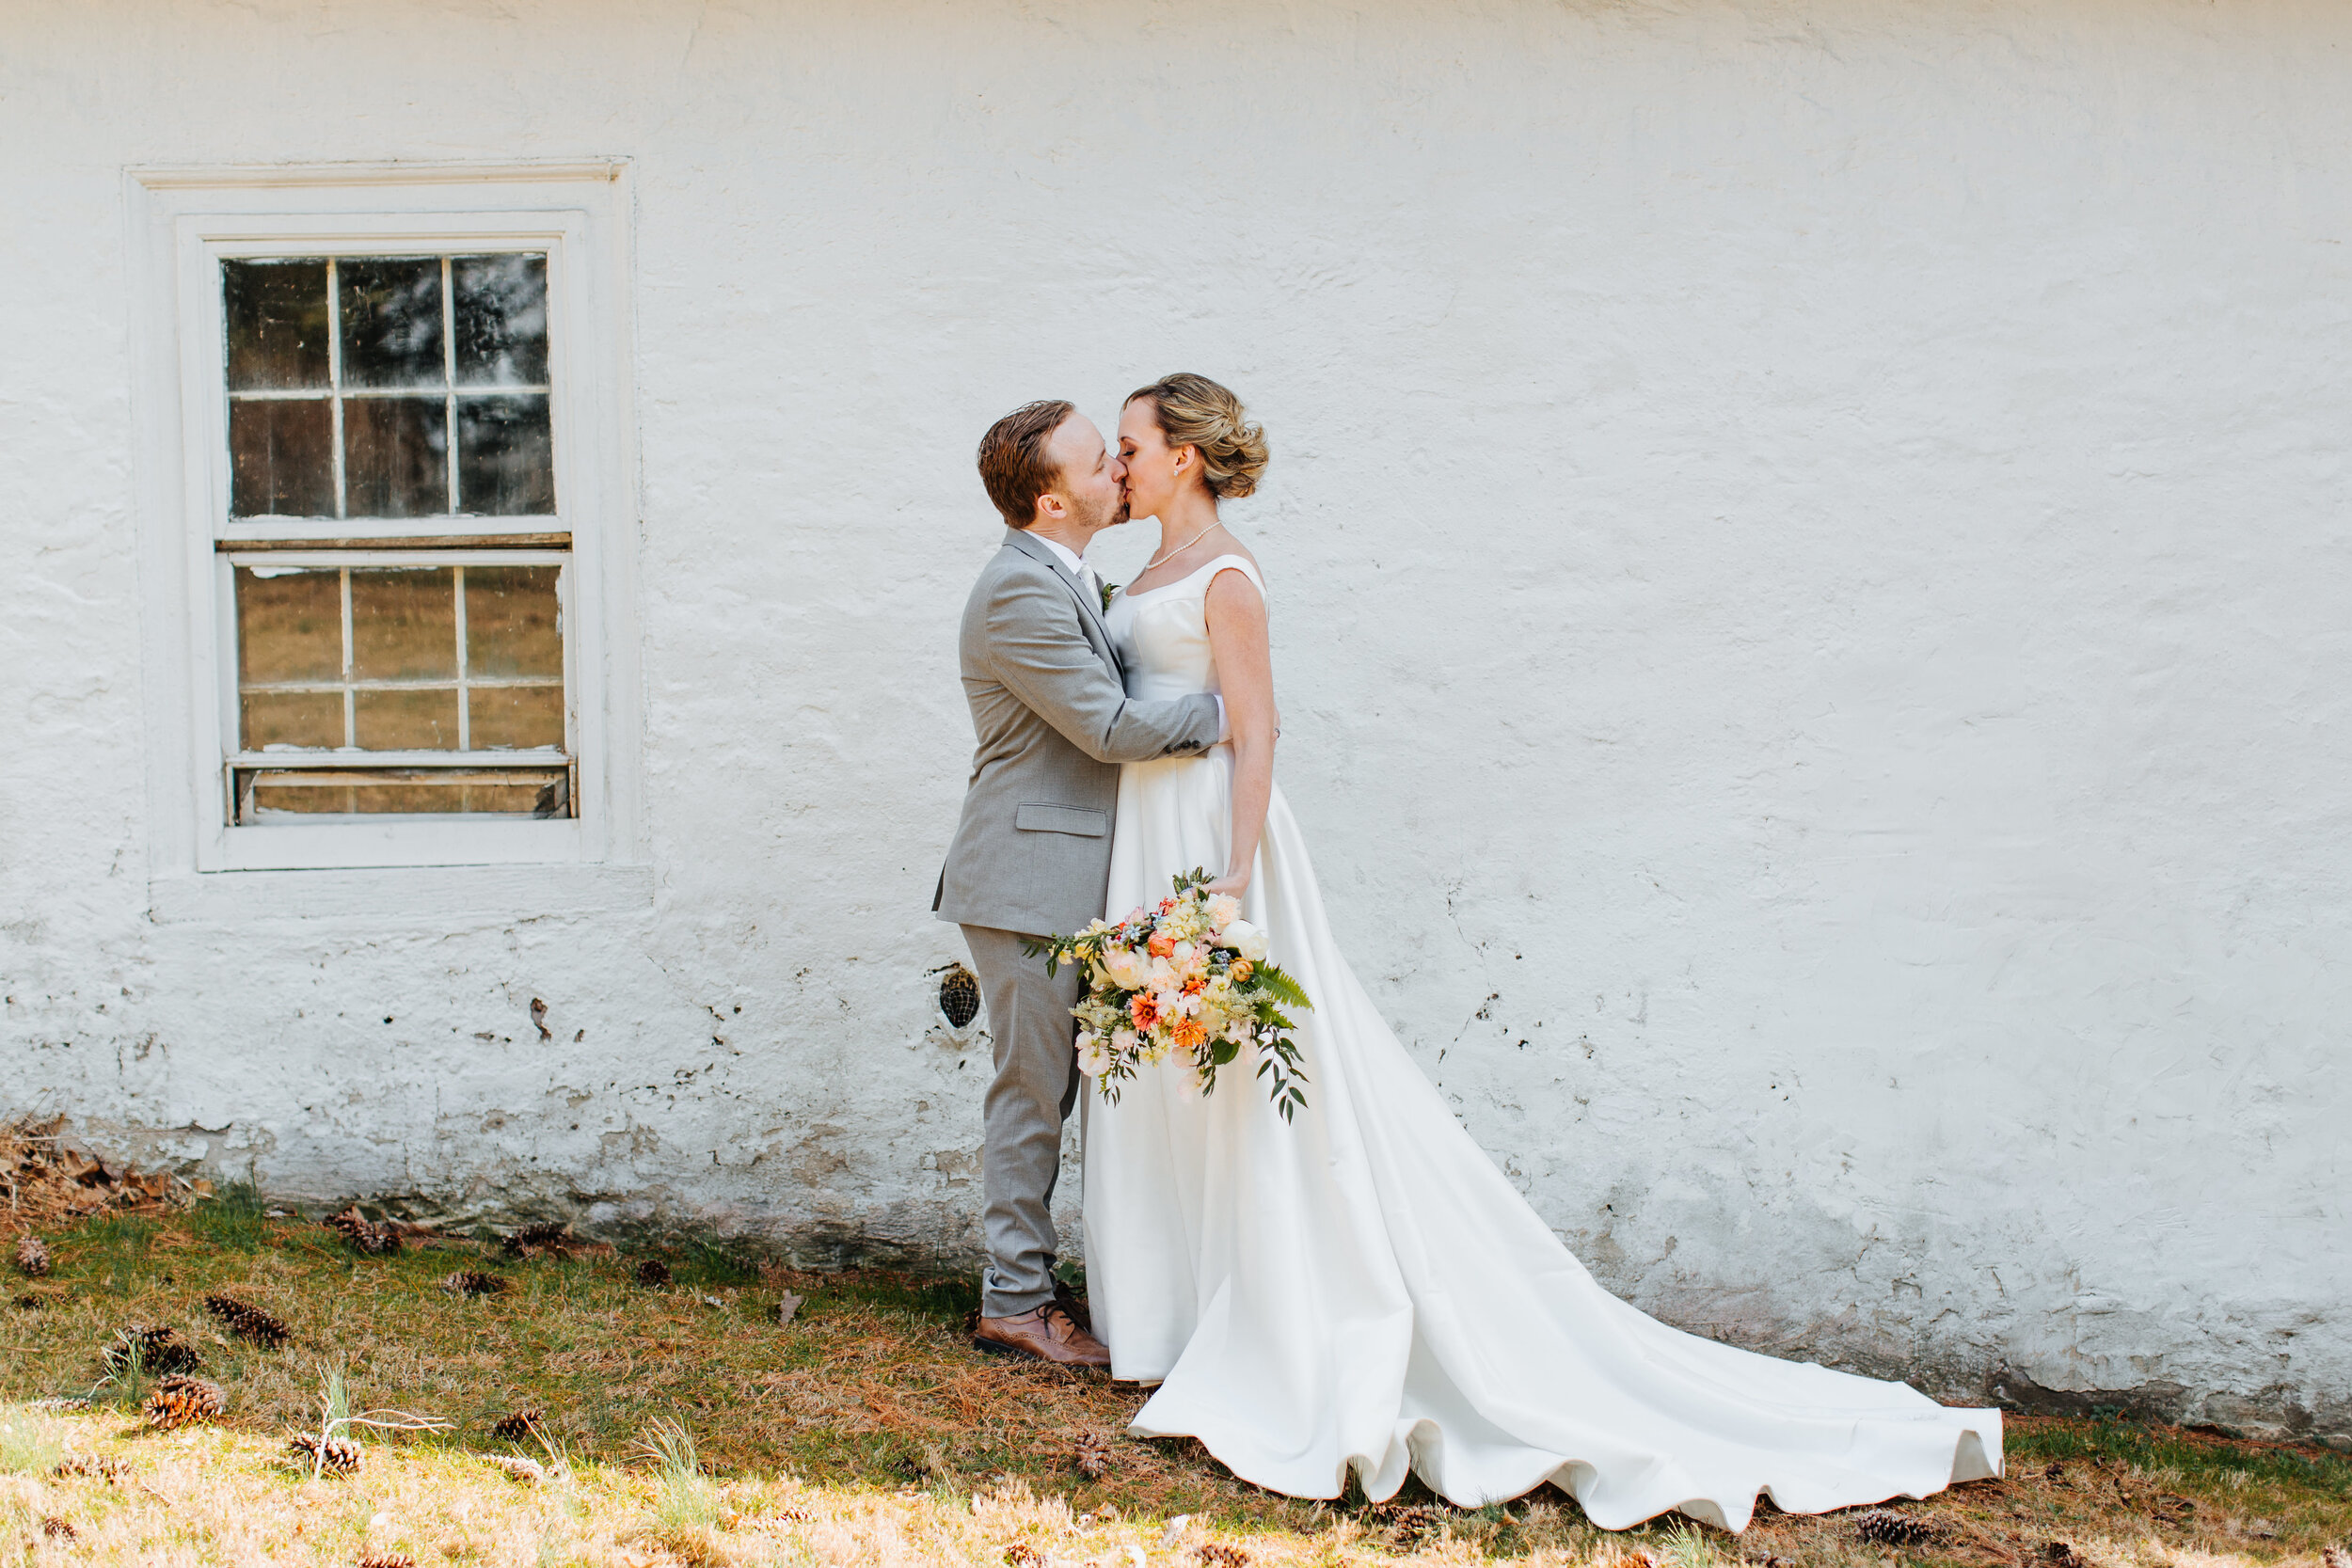 Our Wedding Story: "We never received photos from our wedding day"